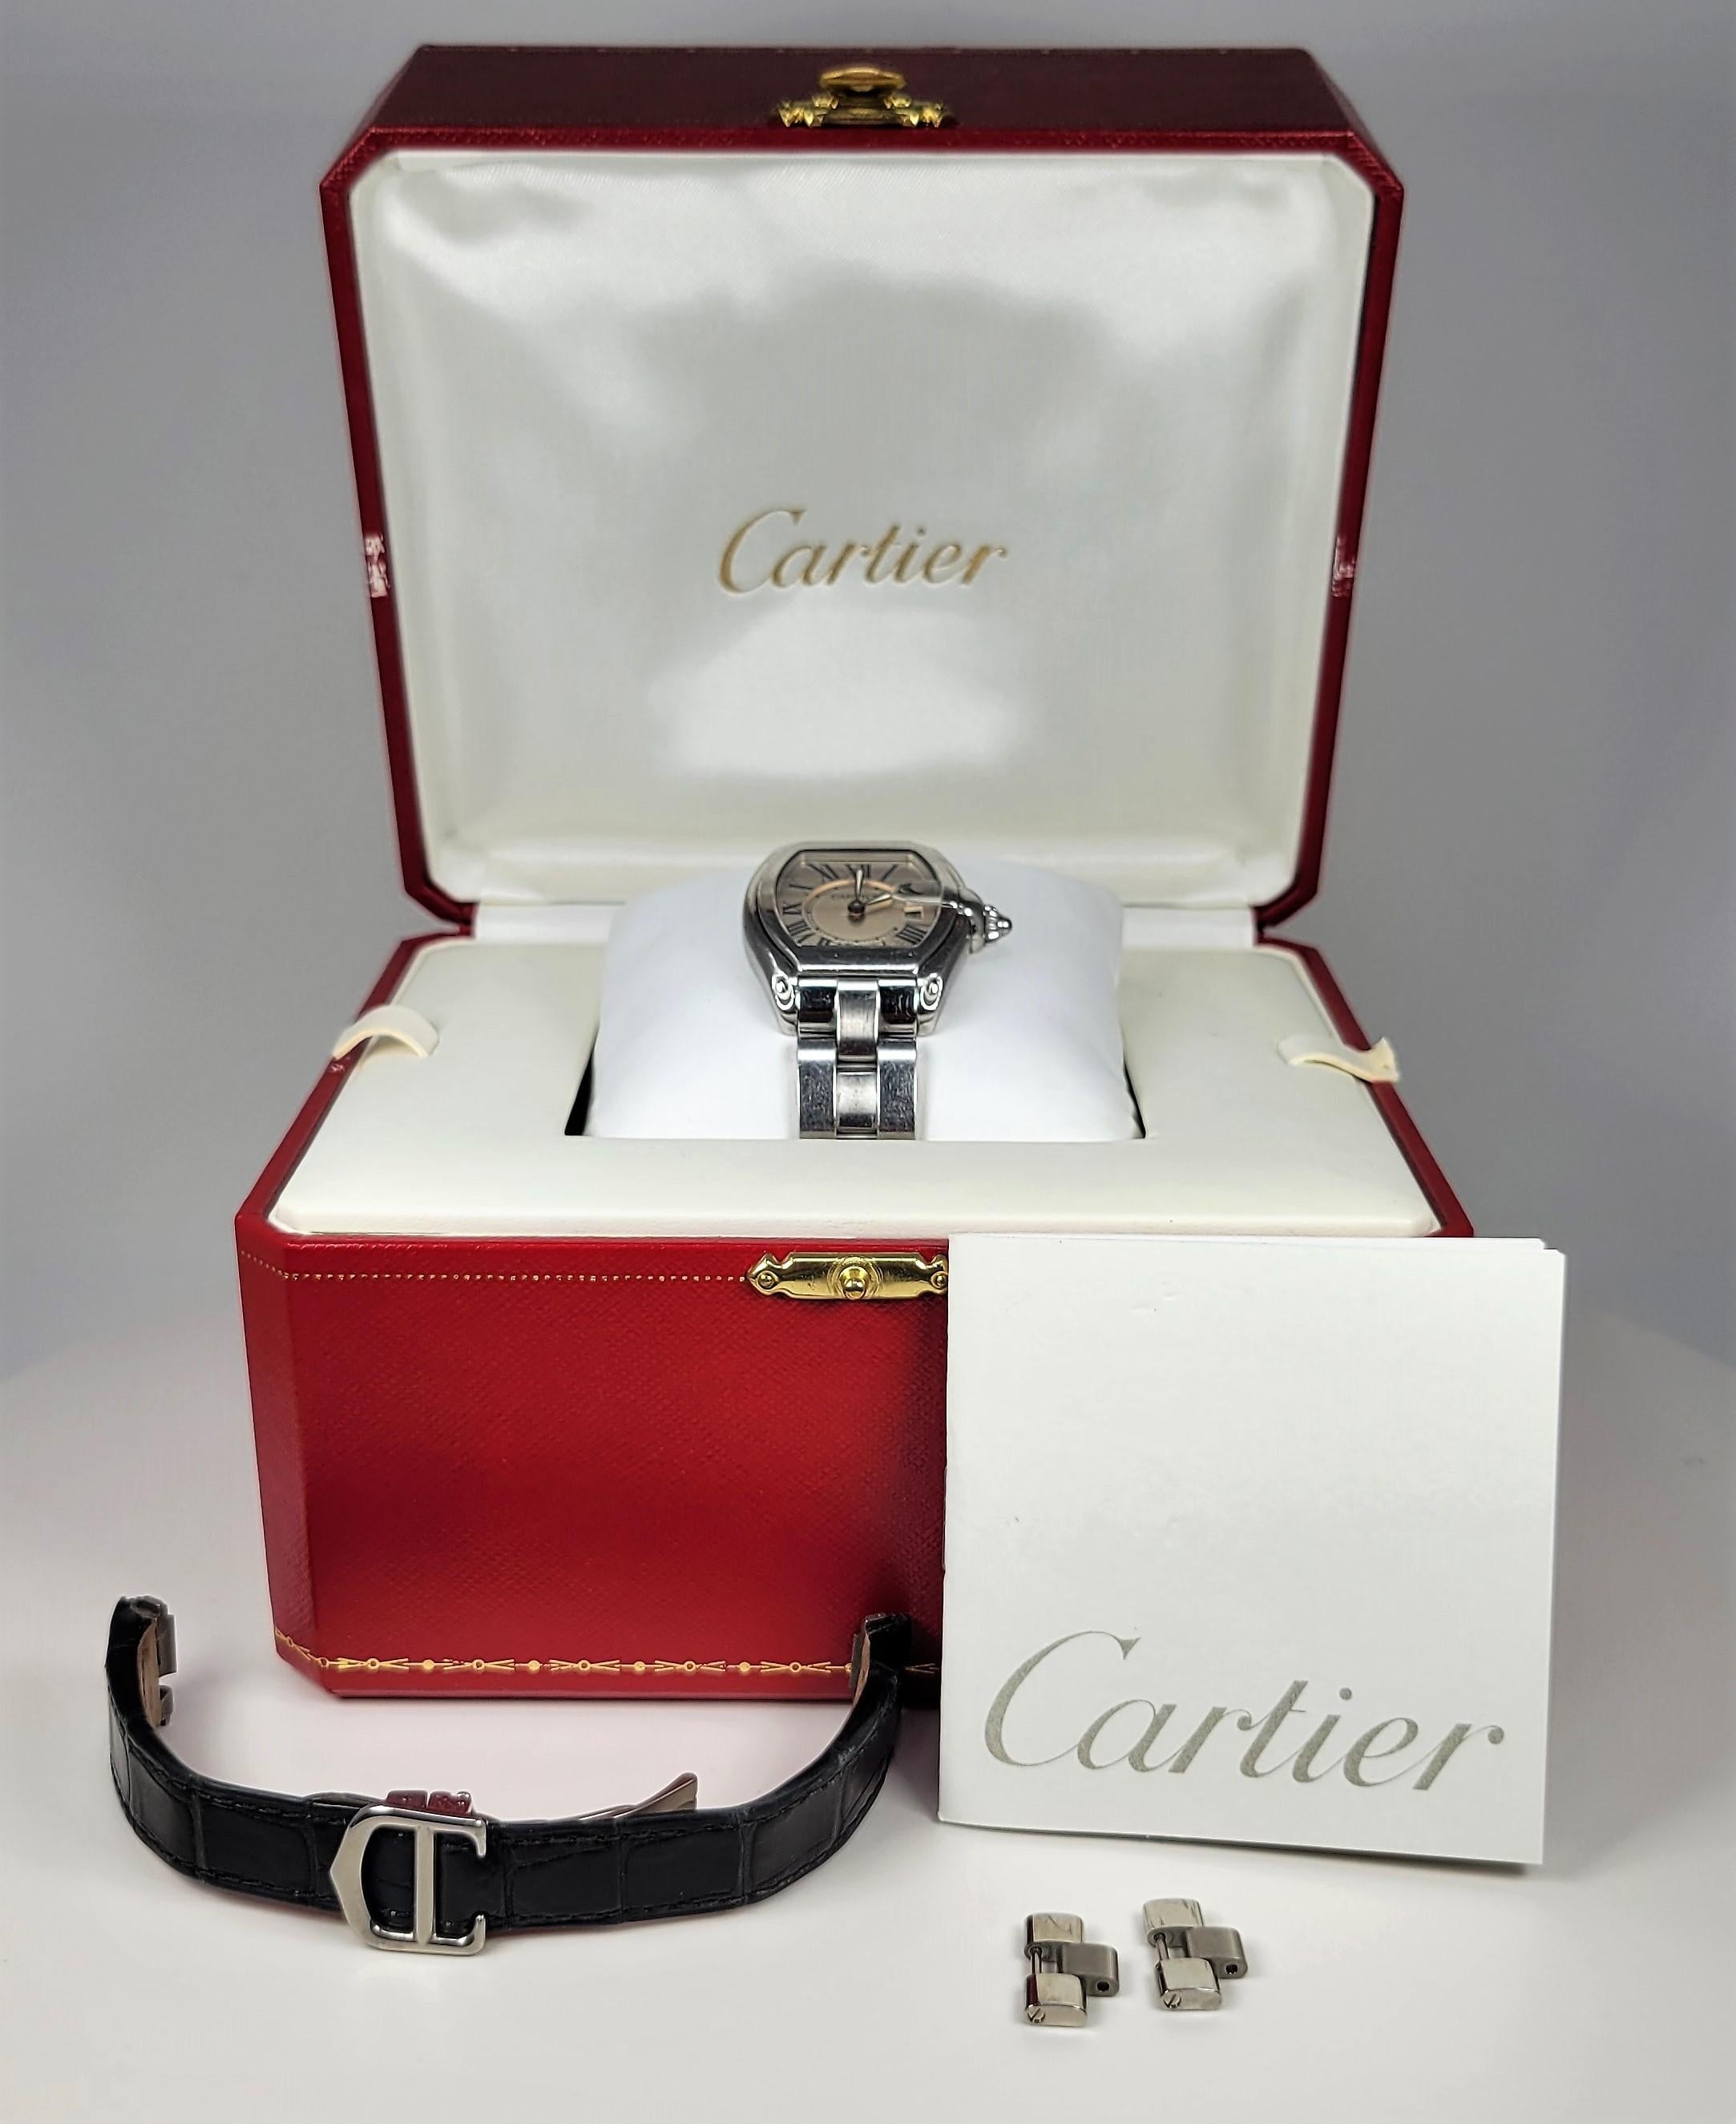 Stainless Steel Cartier Wrist Watch from the 